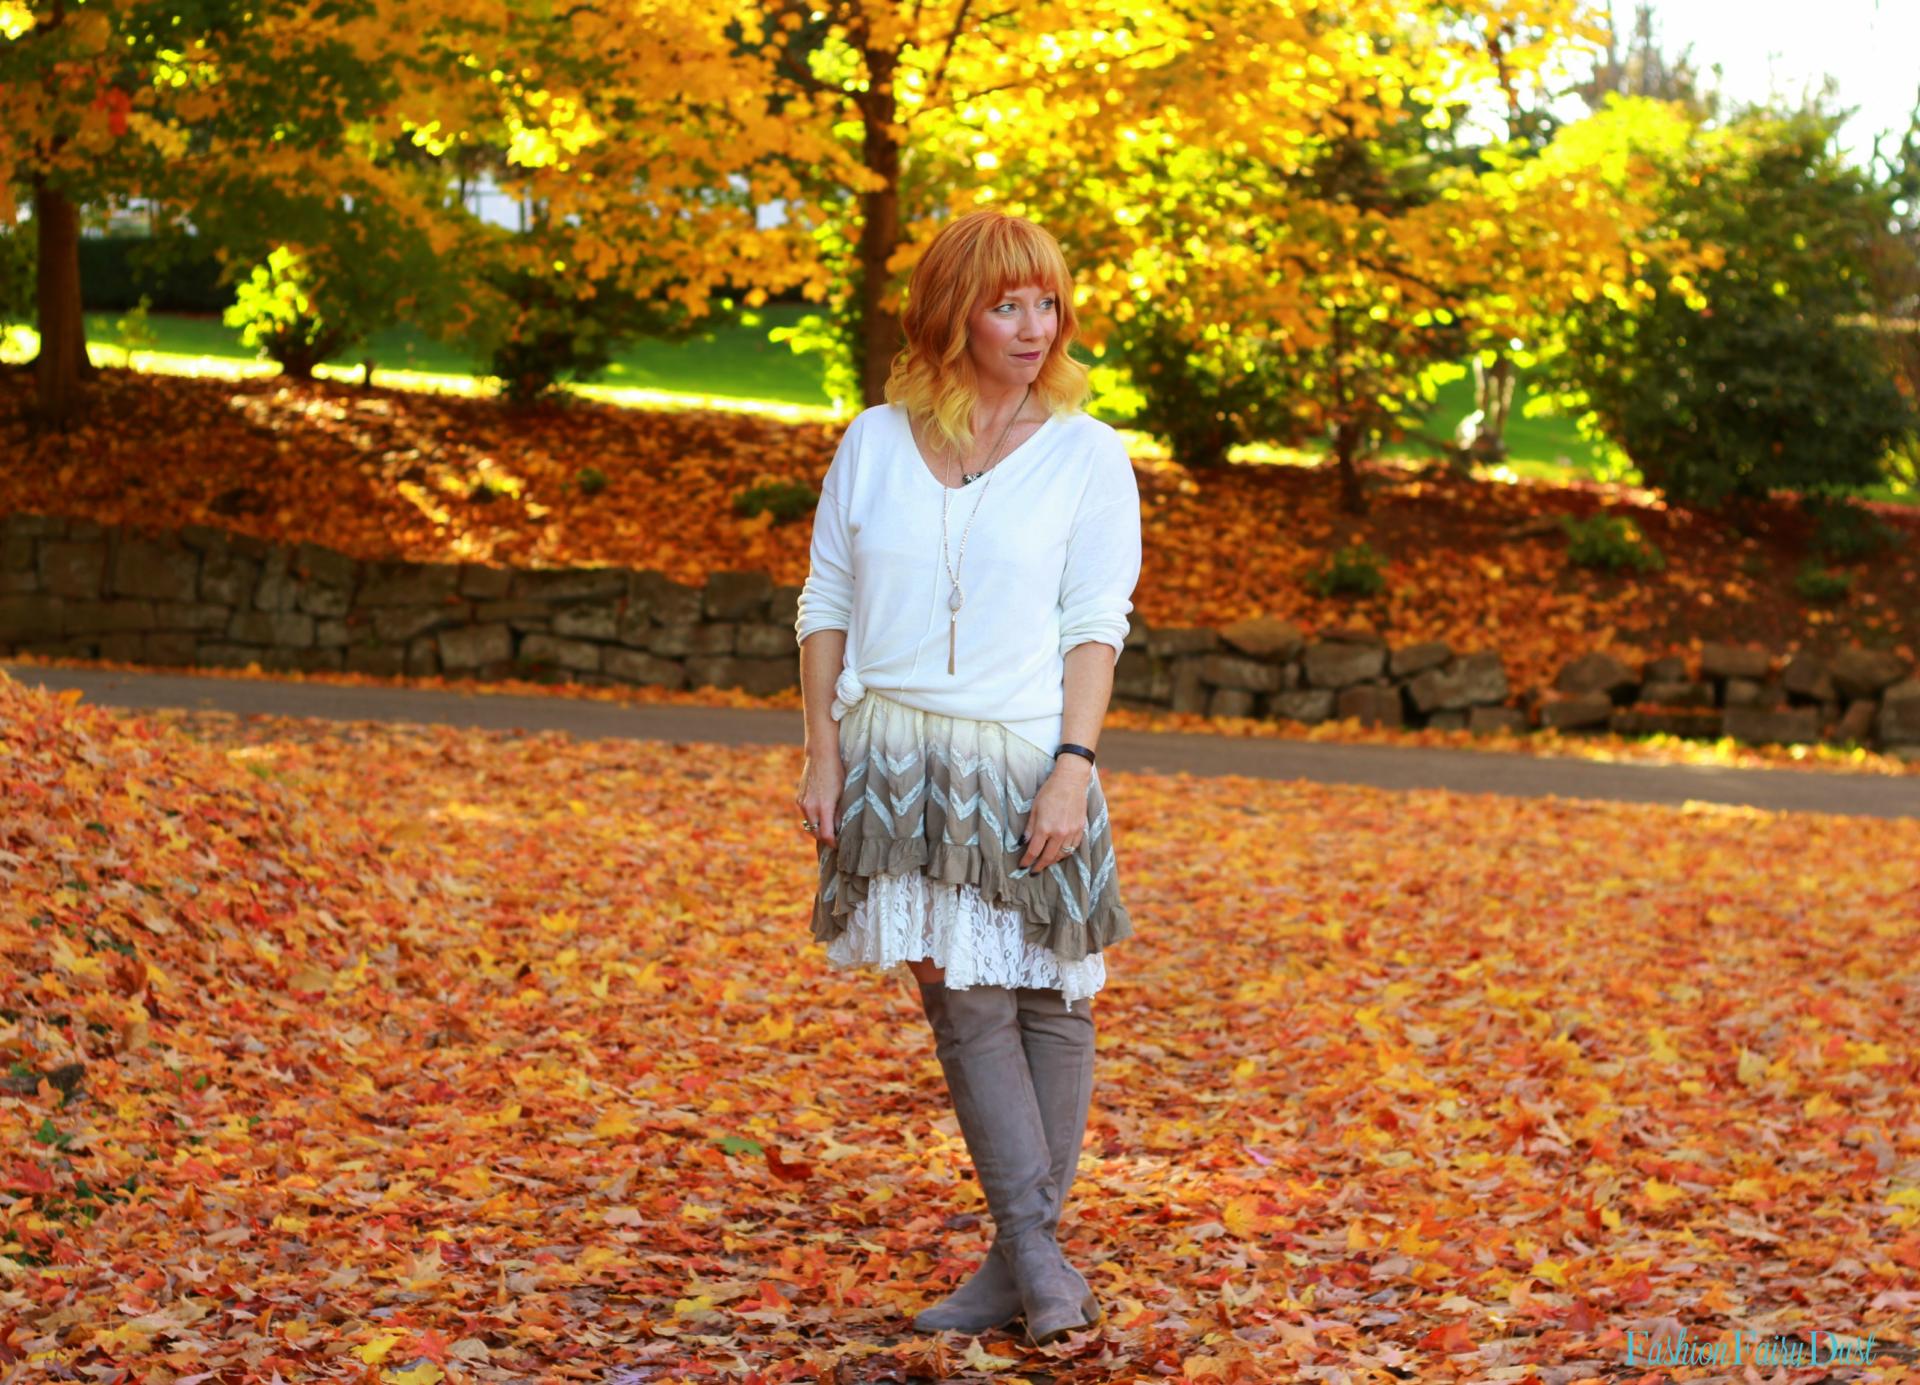 Boho tunic, over the knee boots and knotted sweater. Fall outfit inspiration.